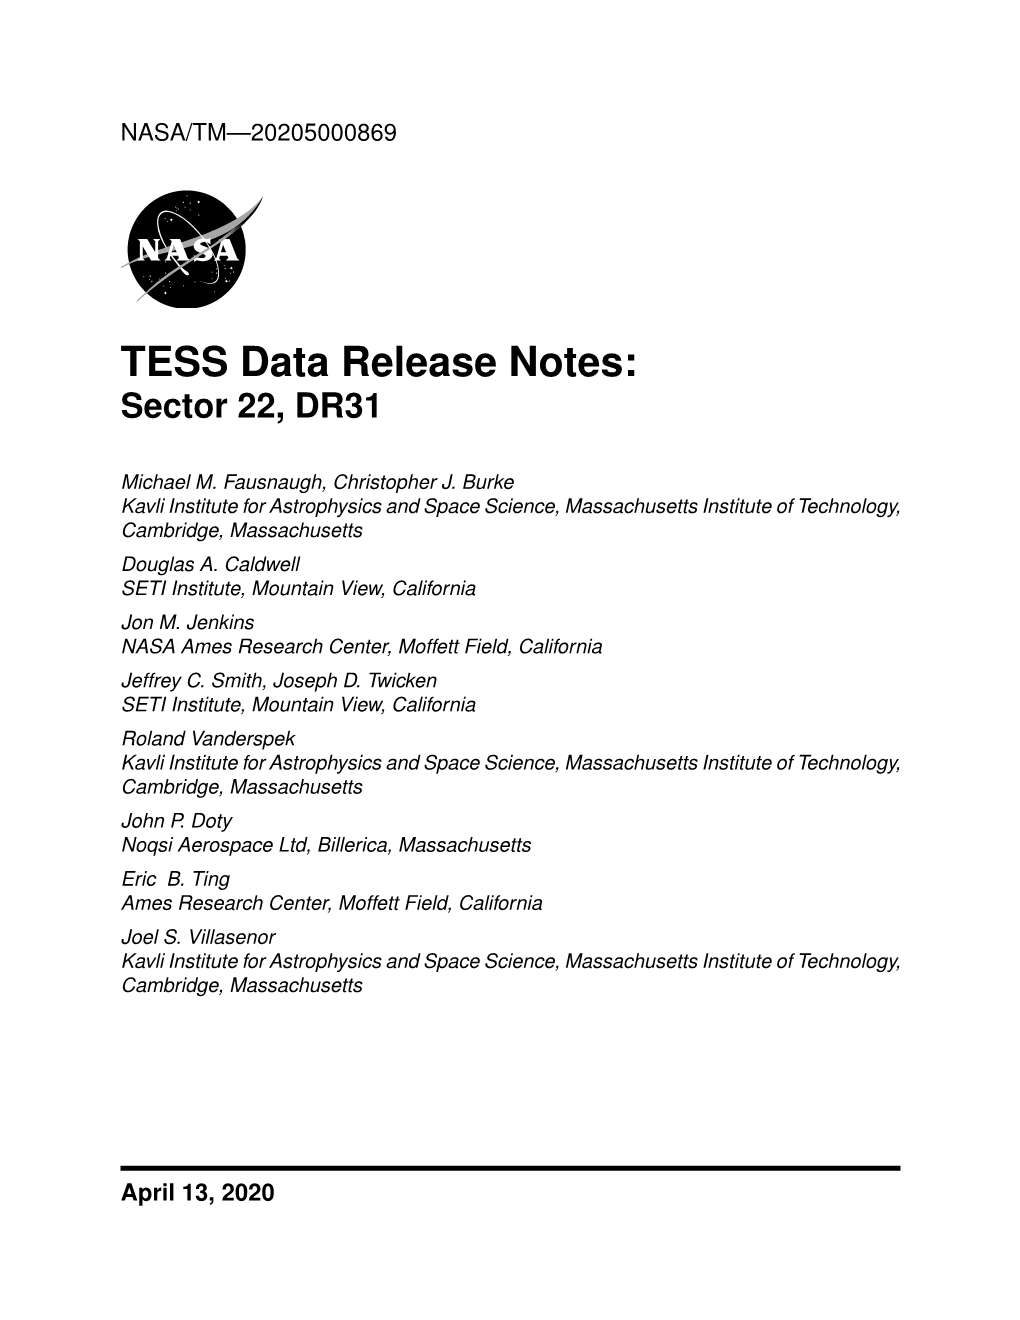 TESS Data Release Notes: Sector 22, DR31